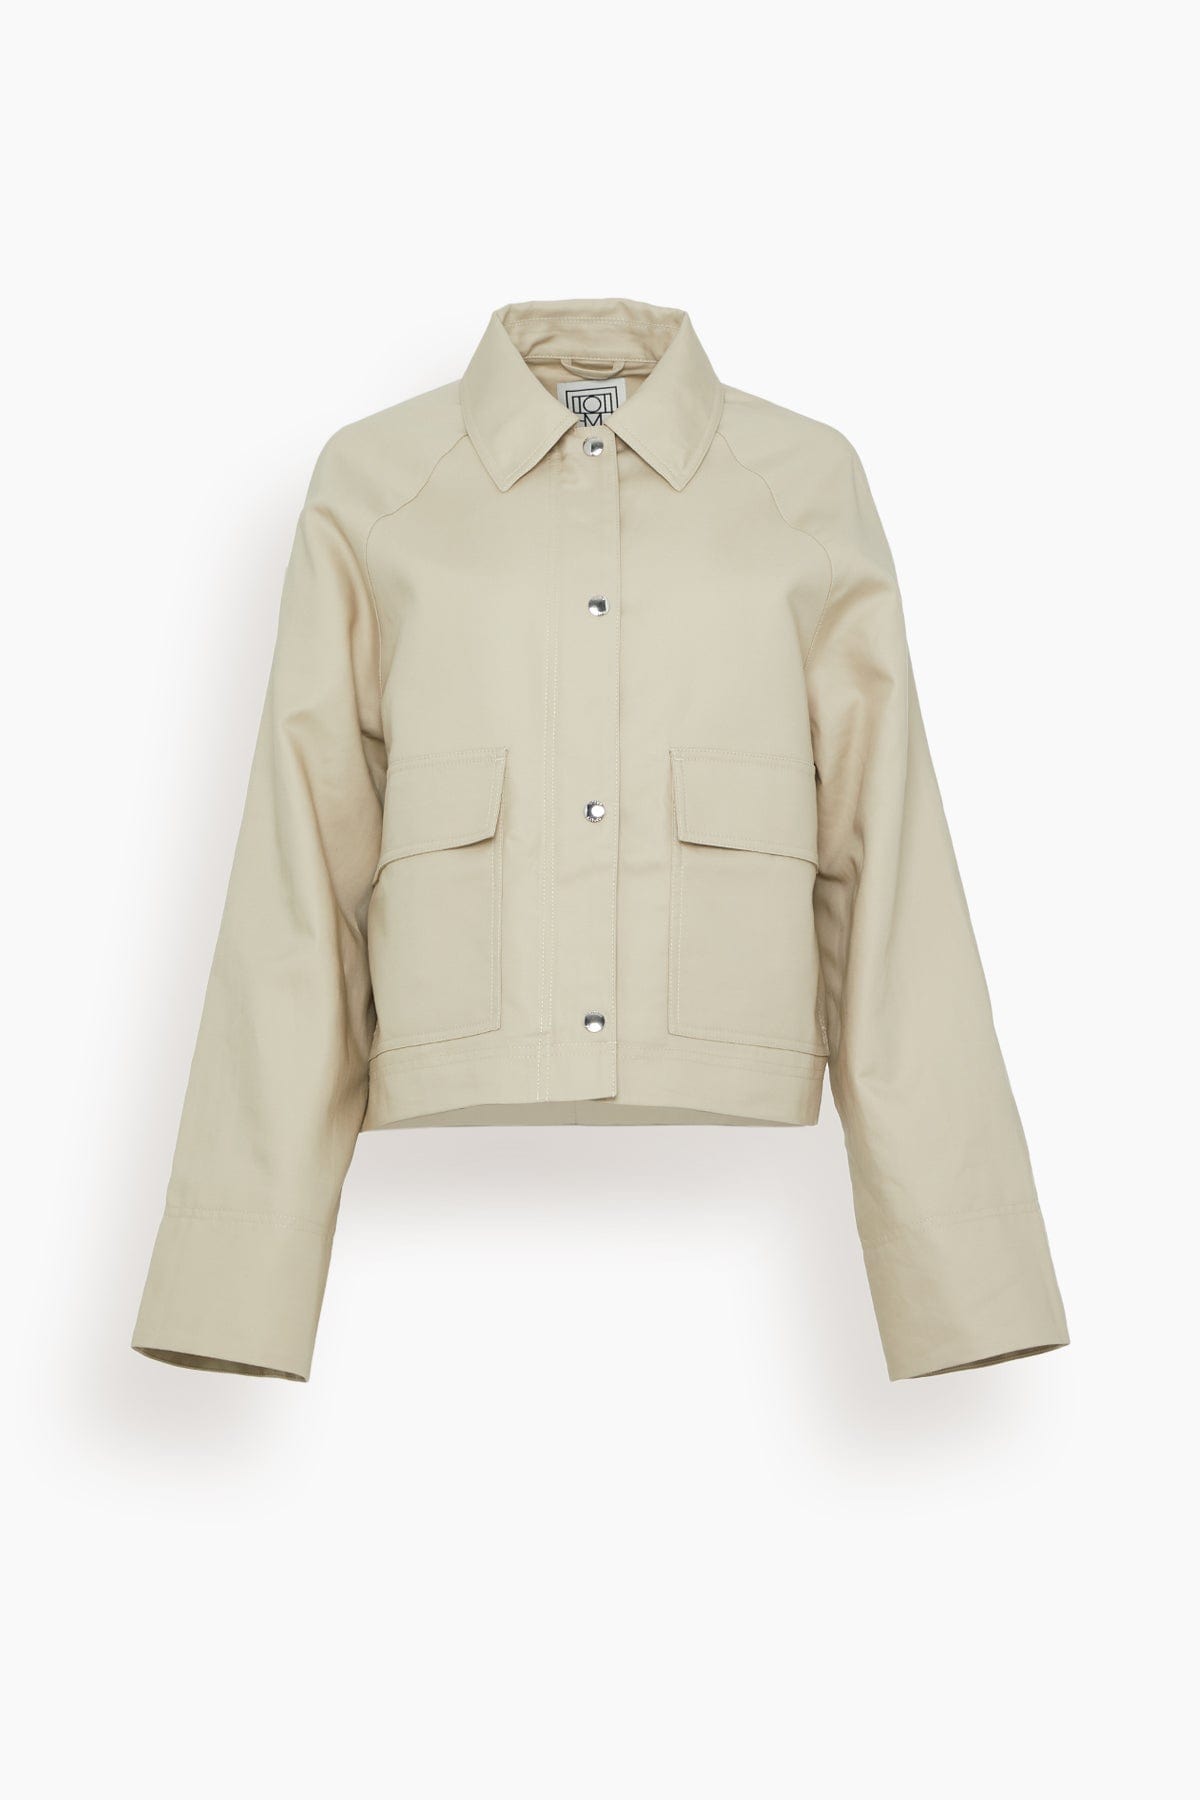 Toteme Jackets Cropped Cotton Jacket in Sand